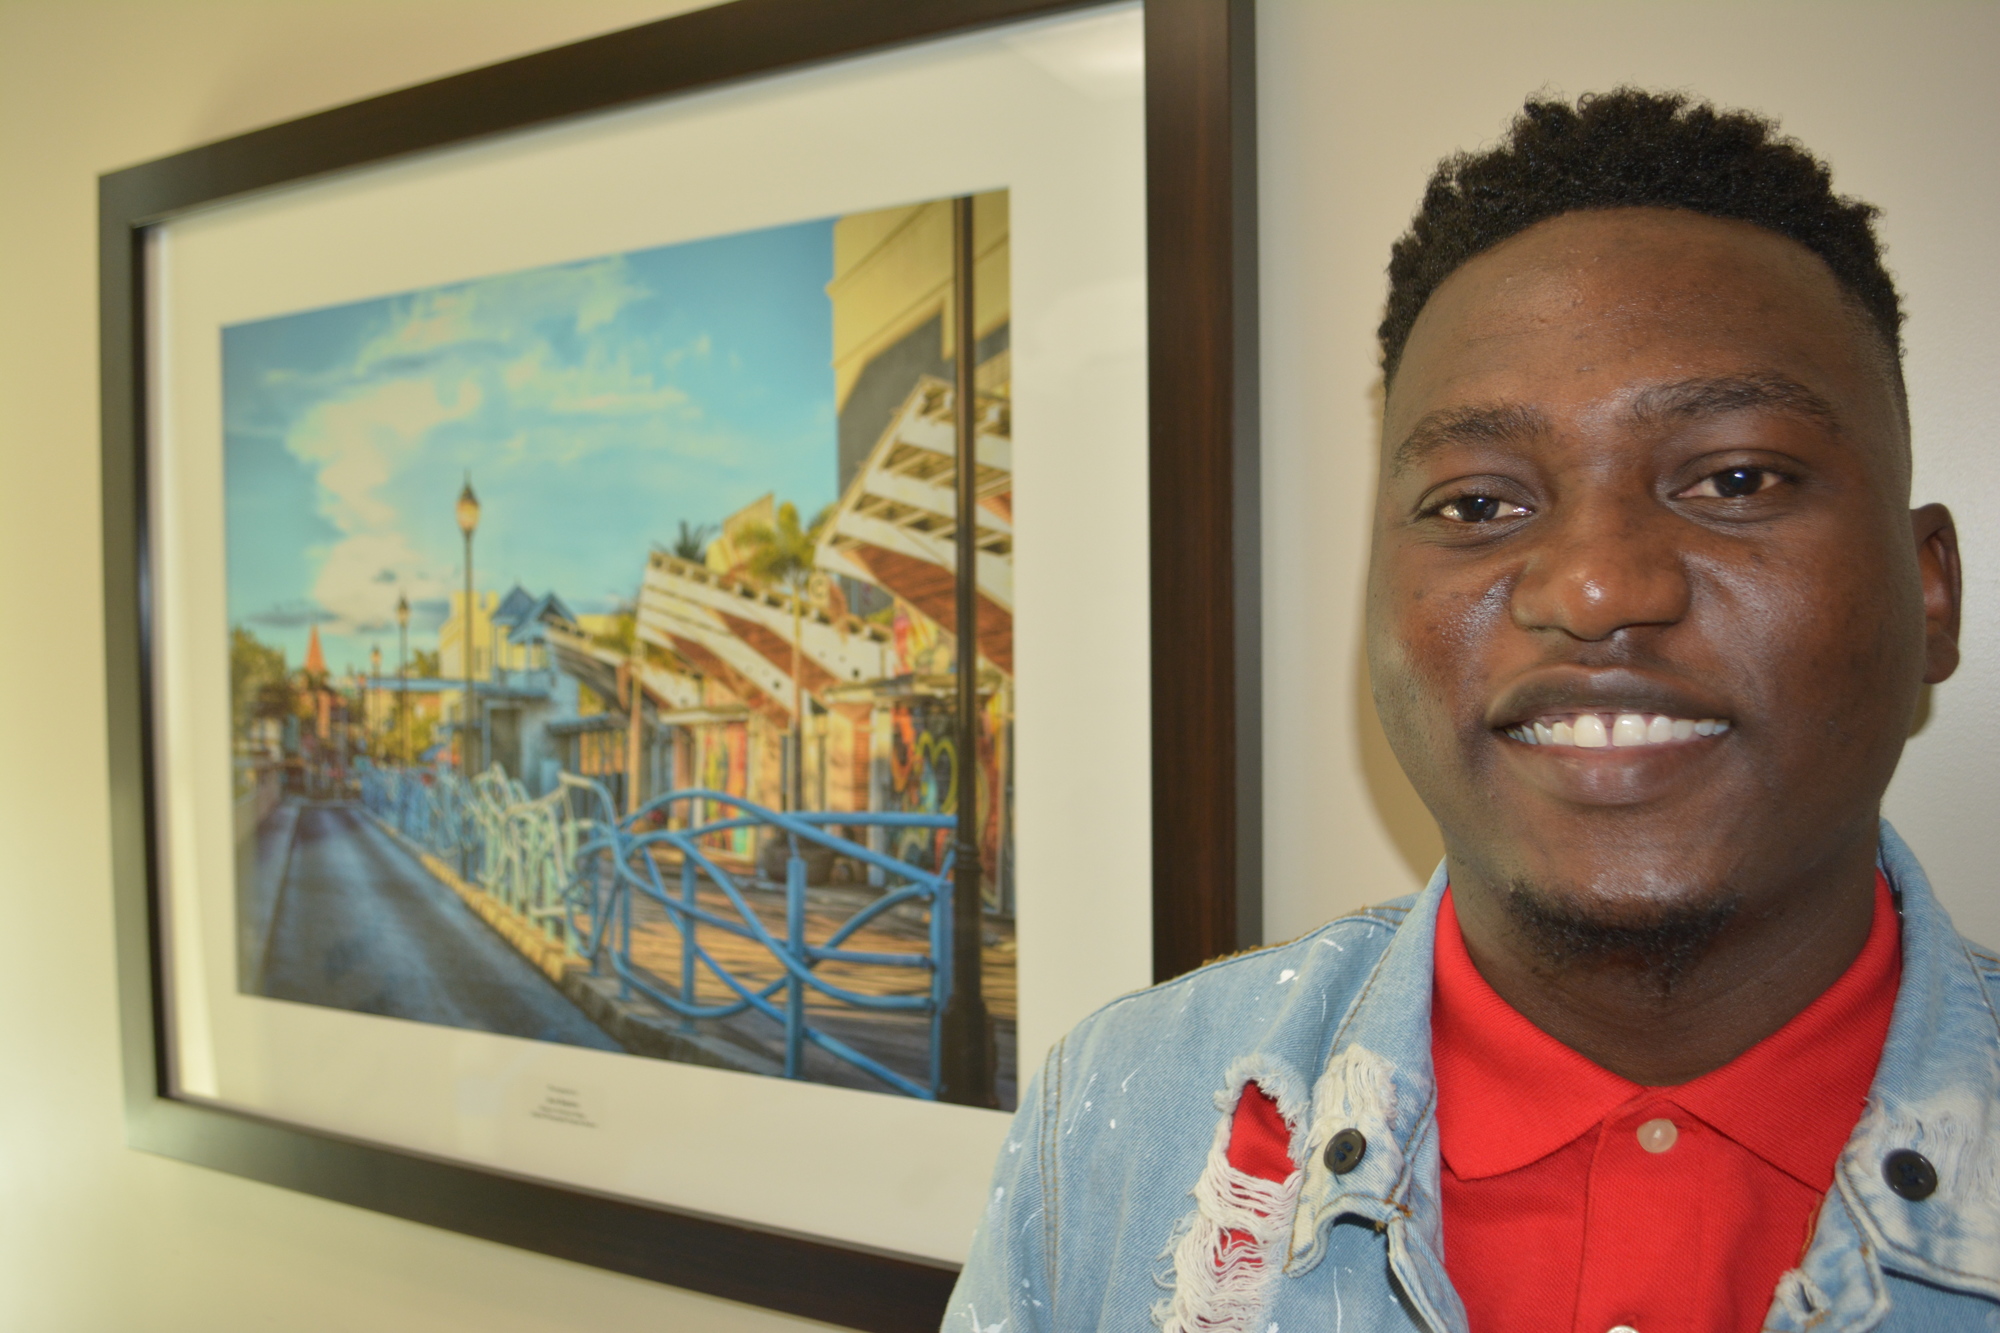 The artwork of Manatee Technical College digital design student Jean Widlet-Jeanbaptiste is featured in the ER's patient rooms.